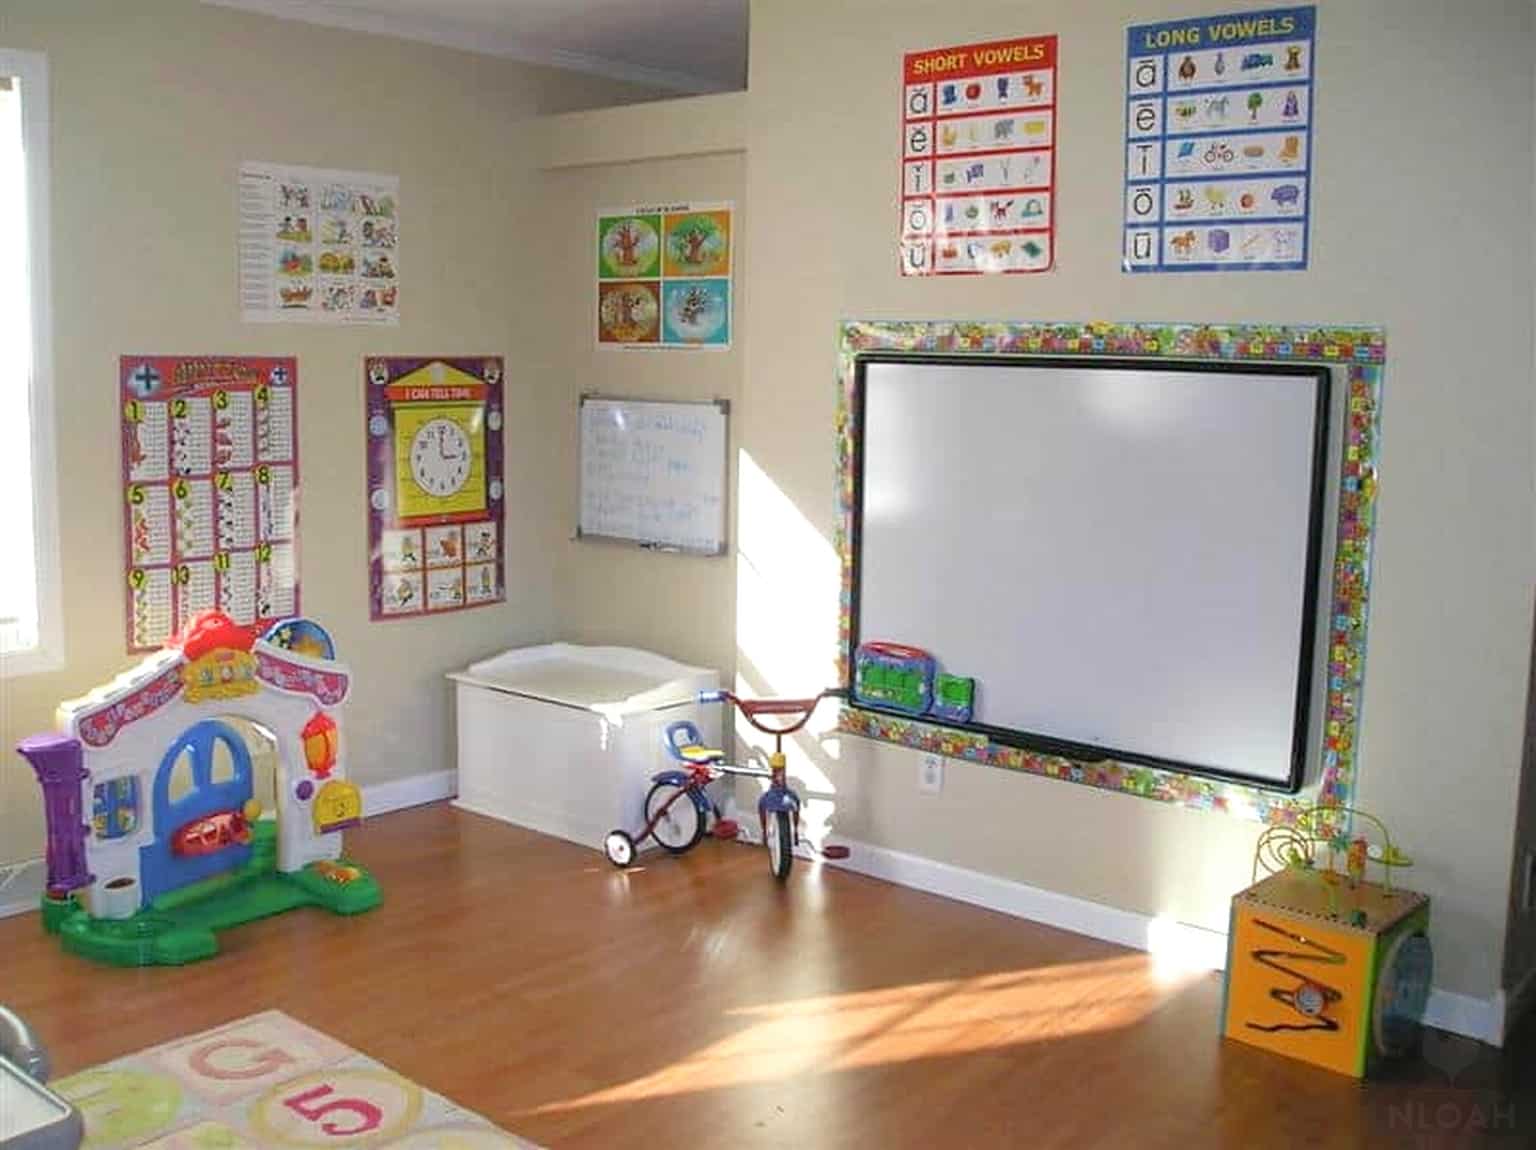 dry erase board and posters on homeschool classroom wall